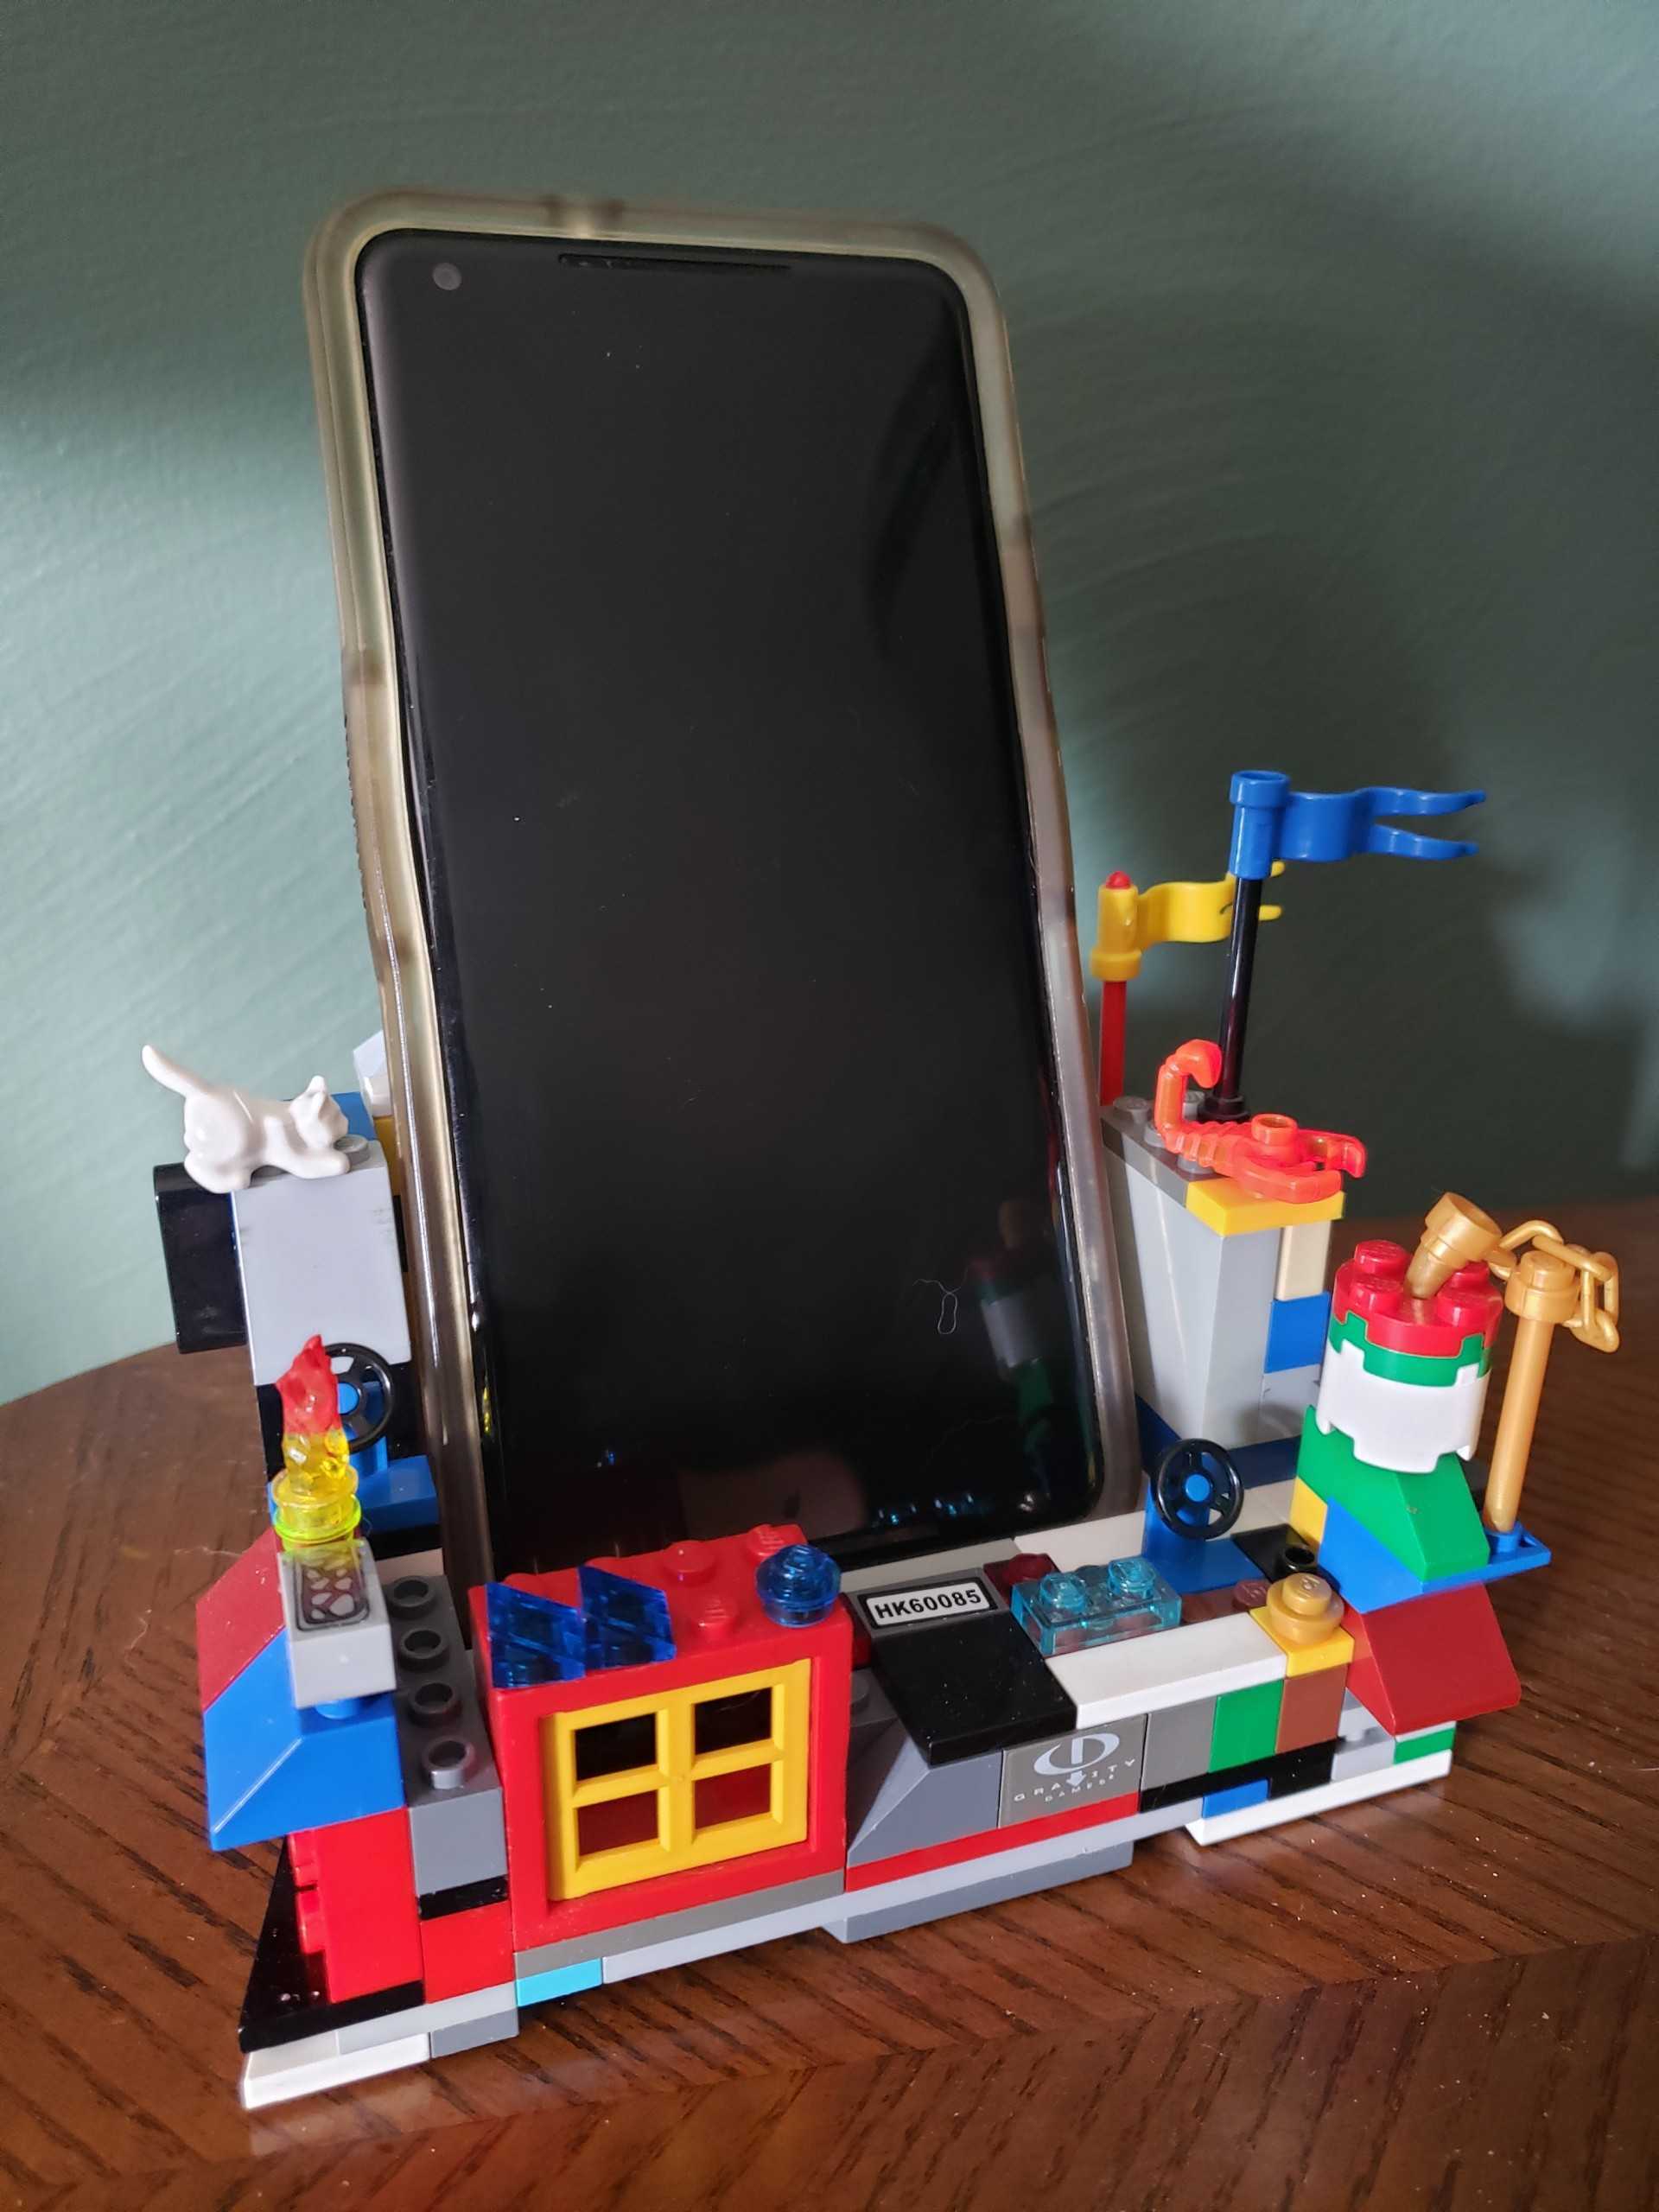 Image description: Hannah's cell phone sitting in her DIY stand made out of Legos, which includes lots of disparate shapes and colors.